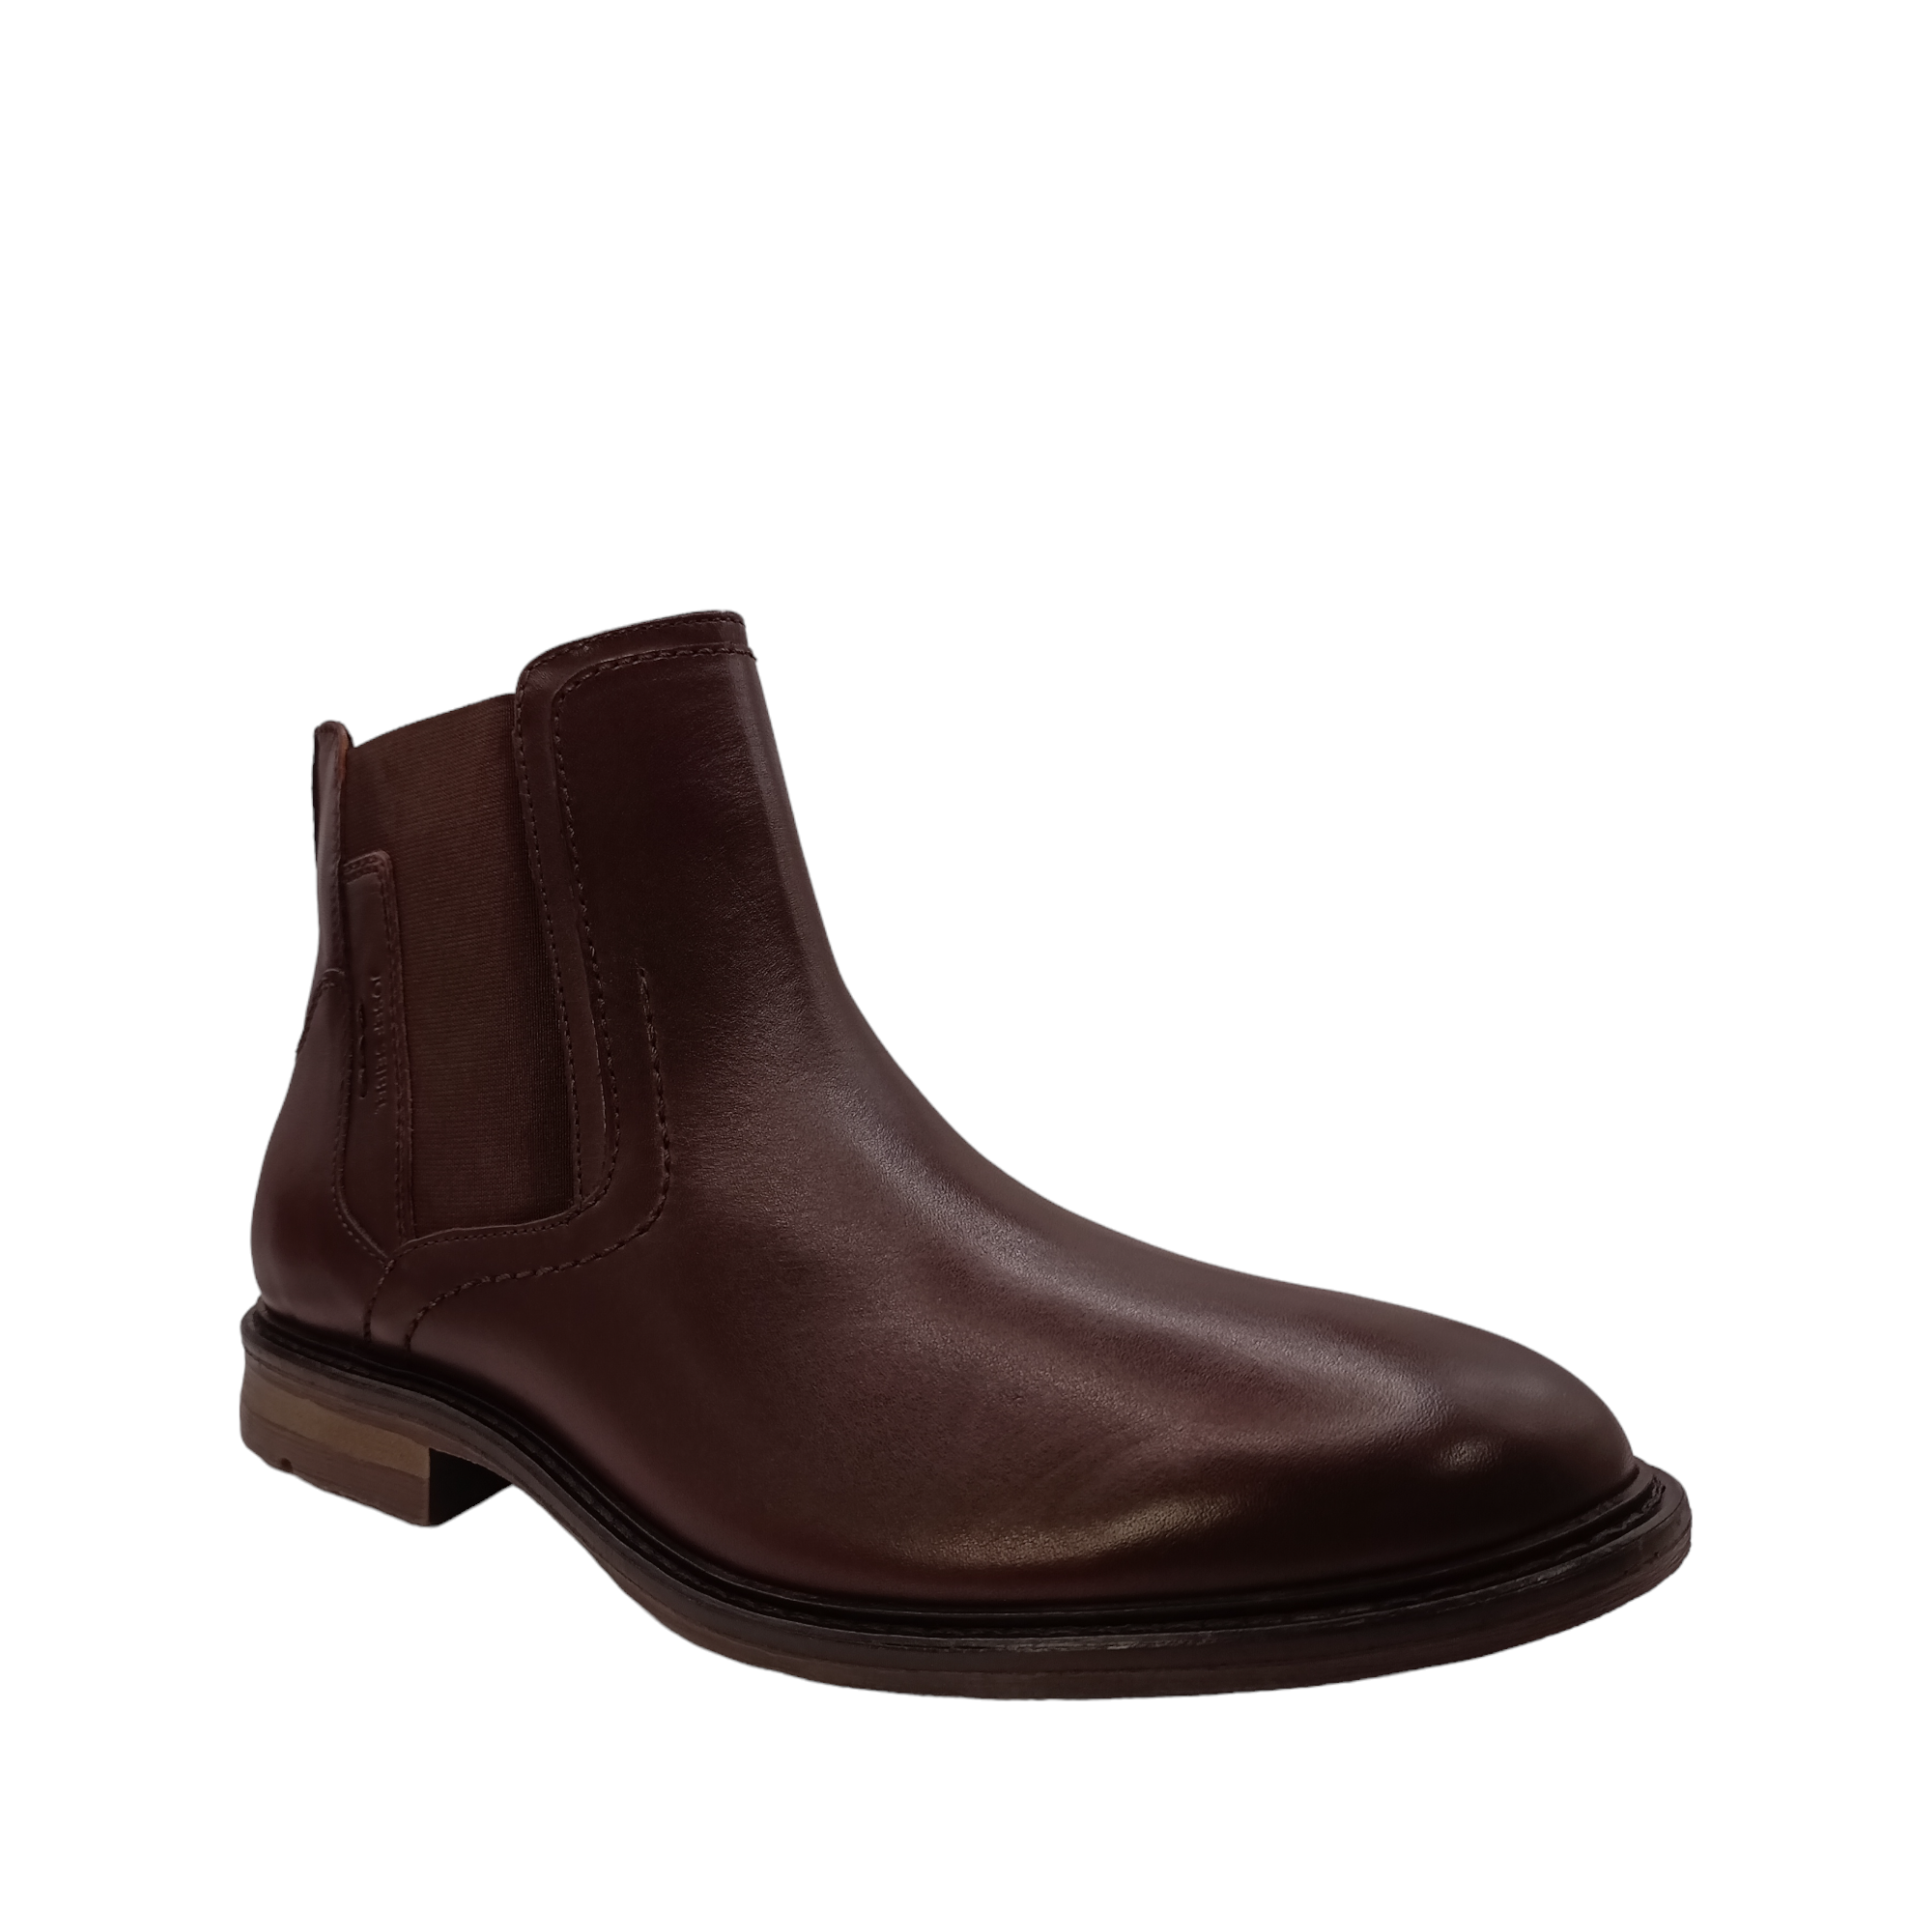 Side angle view of Earl 08 from Josef Seibel. Brown leather boot with large gusset. Shop online and instore with shoe&amp;me